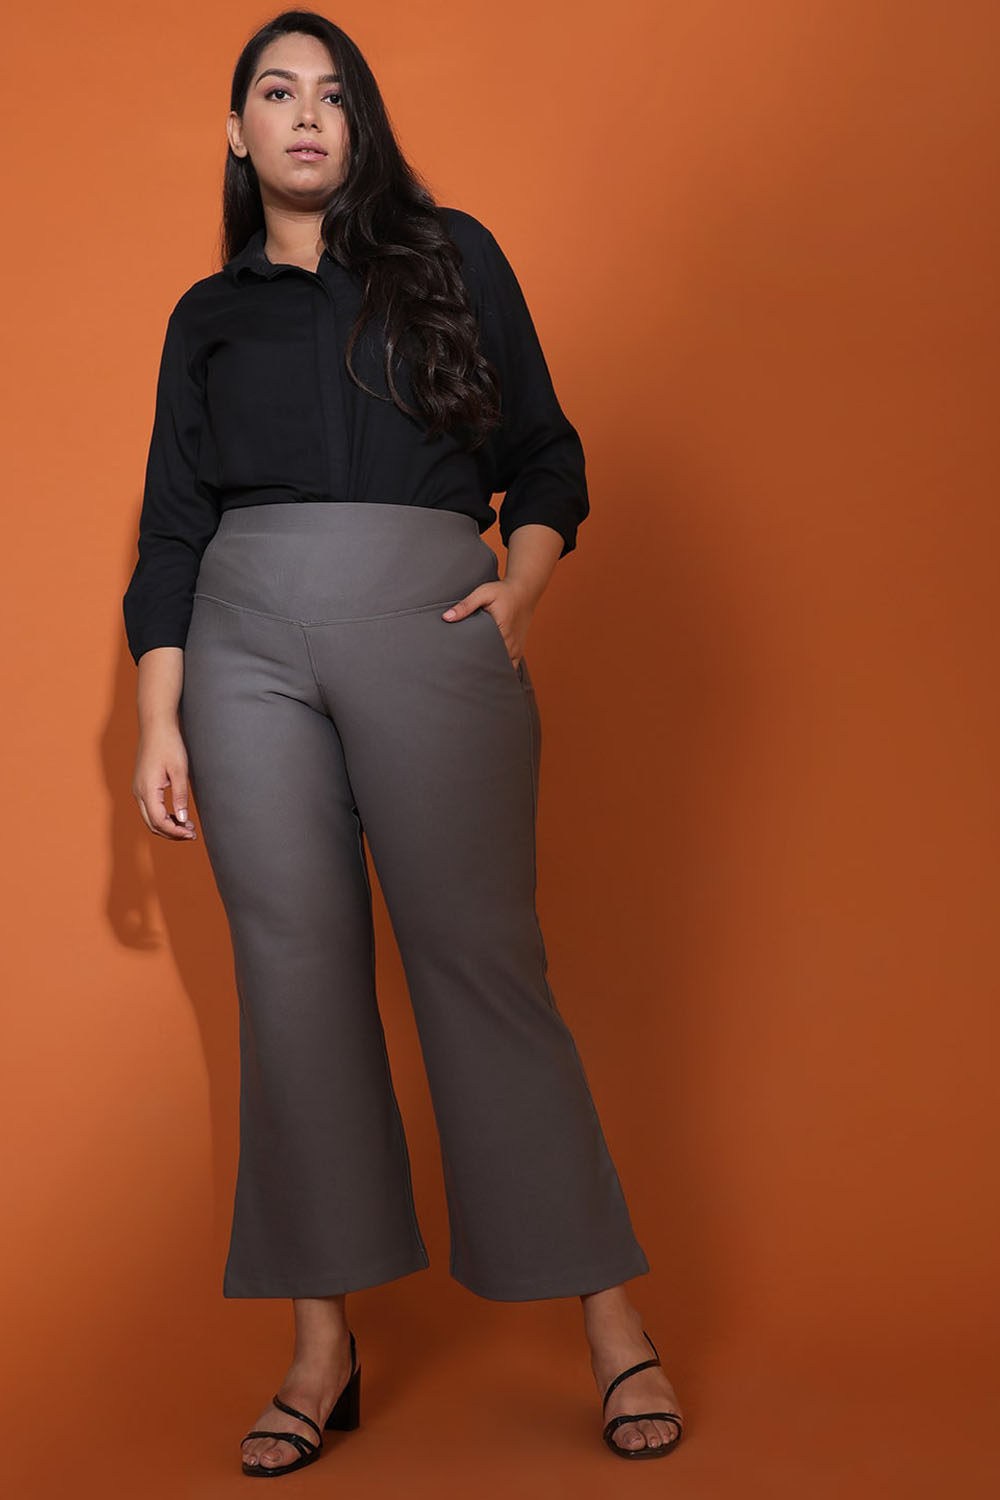 Plus Size Formal Pants - Comfortable Formal Trousers For Ladies